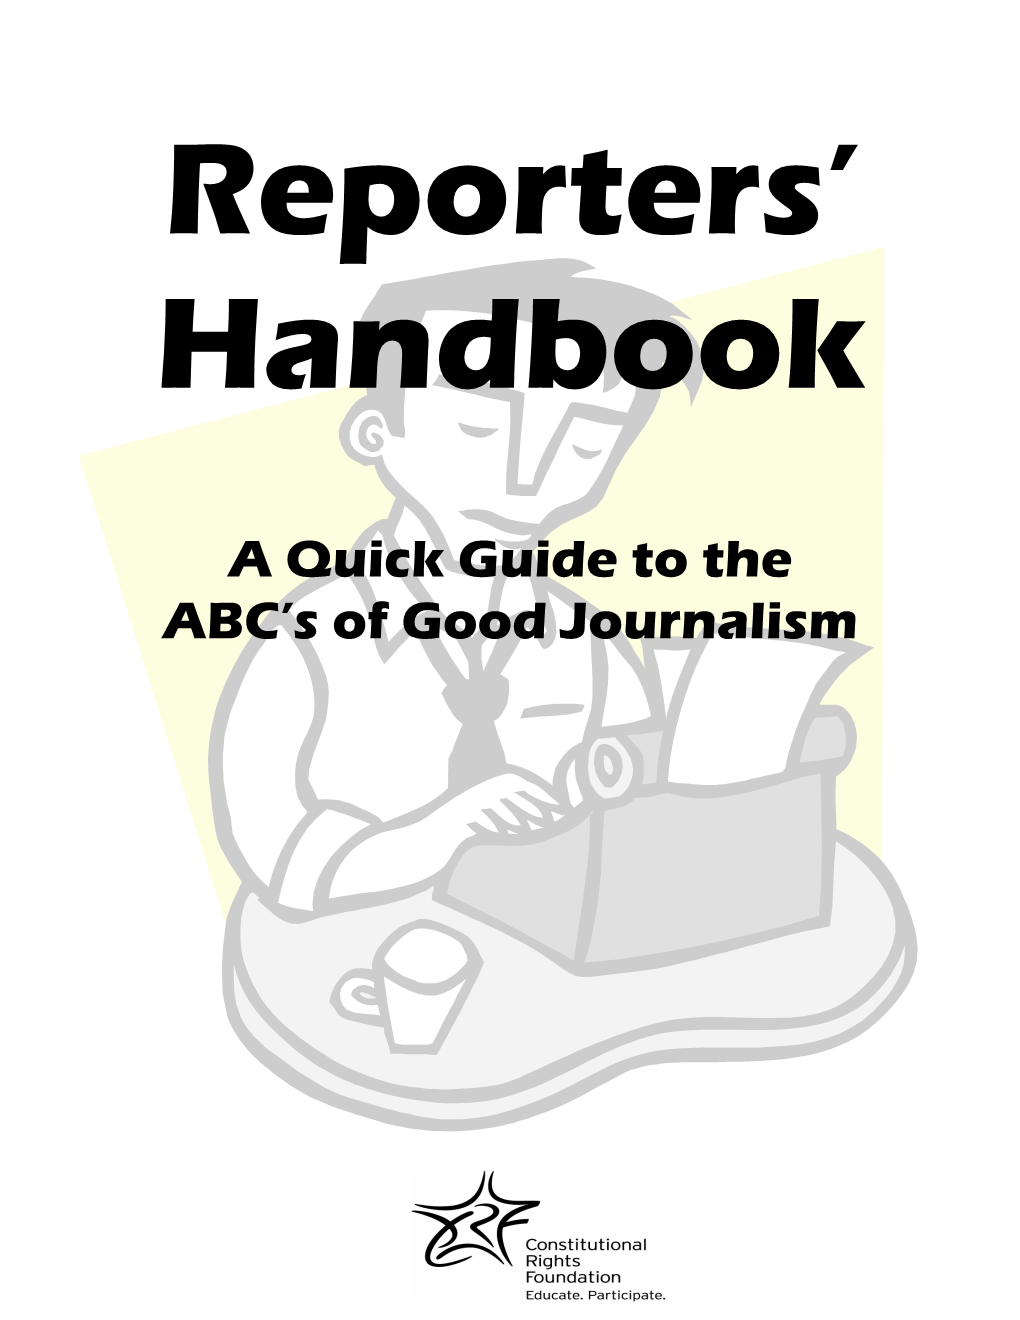 A Quick Guide to the ABC's of Good Journalism